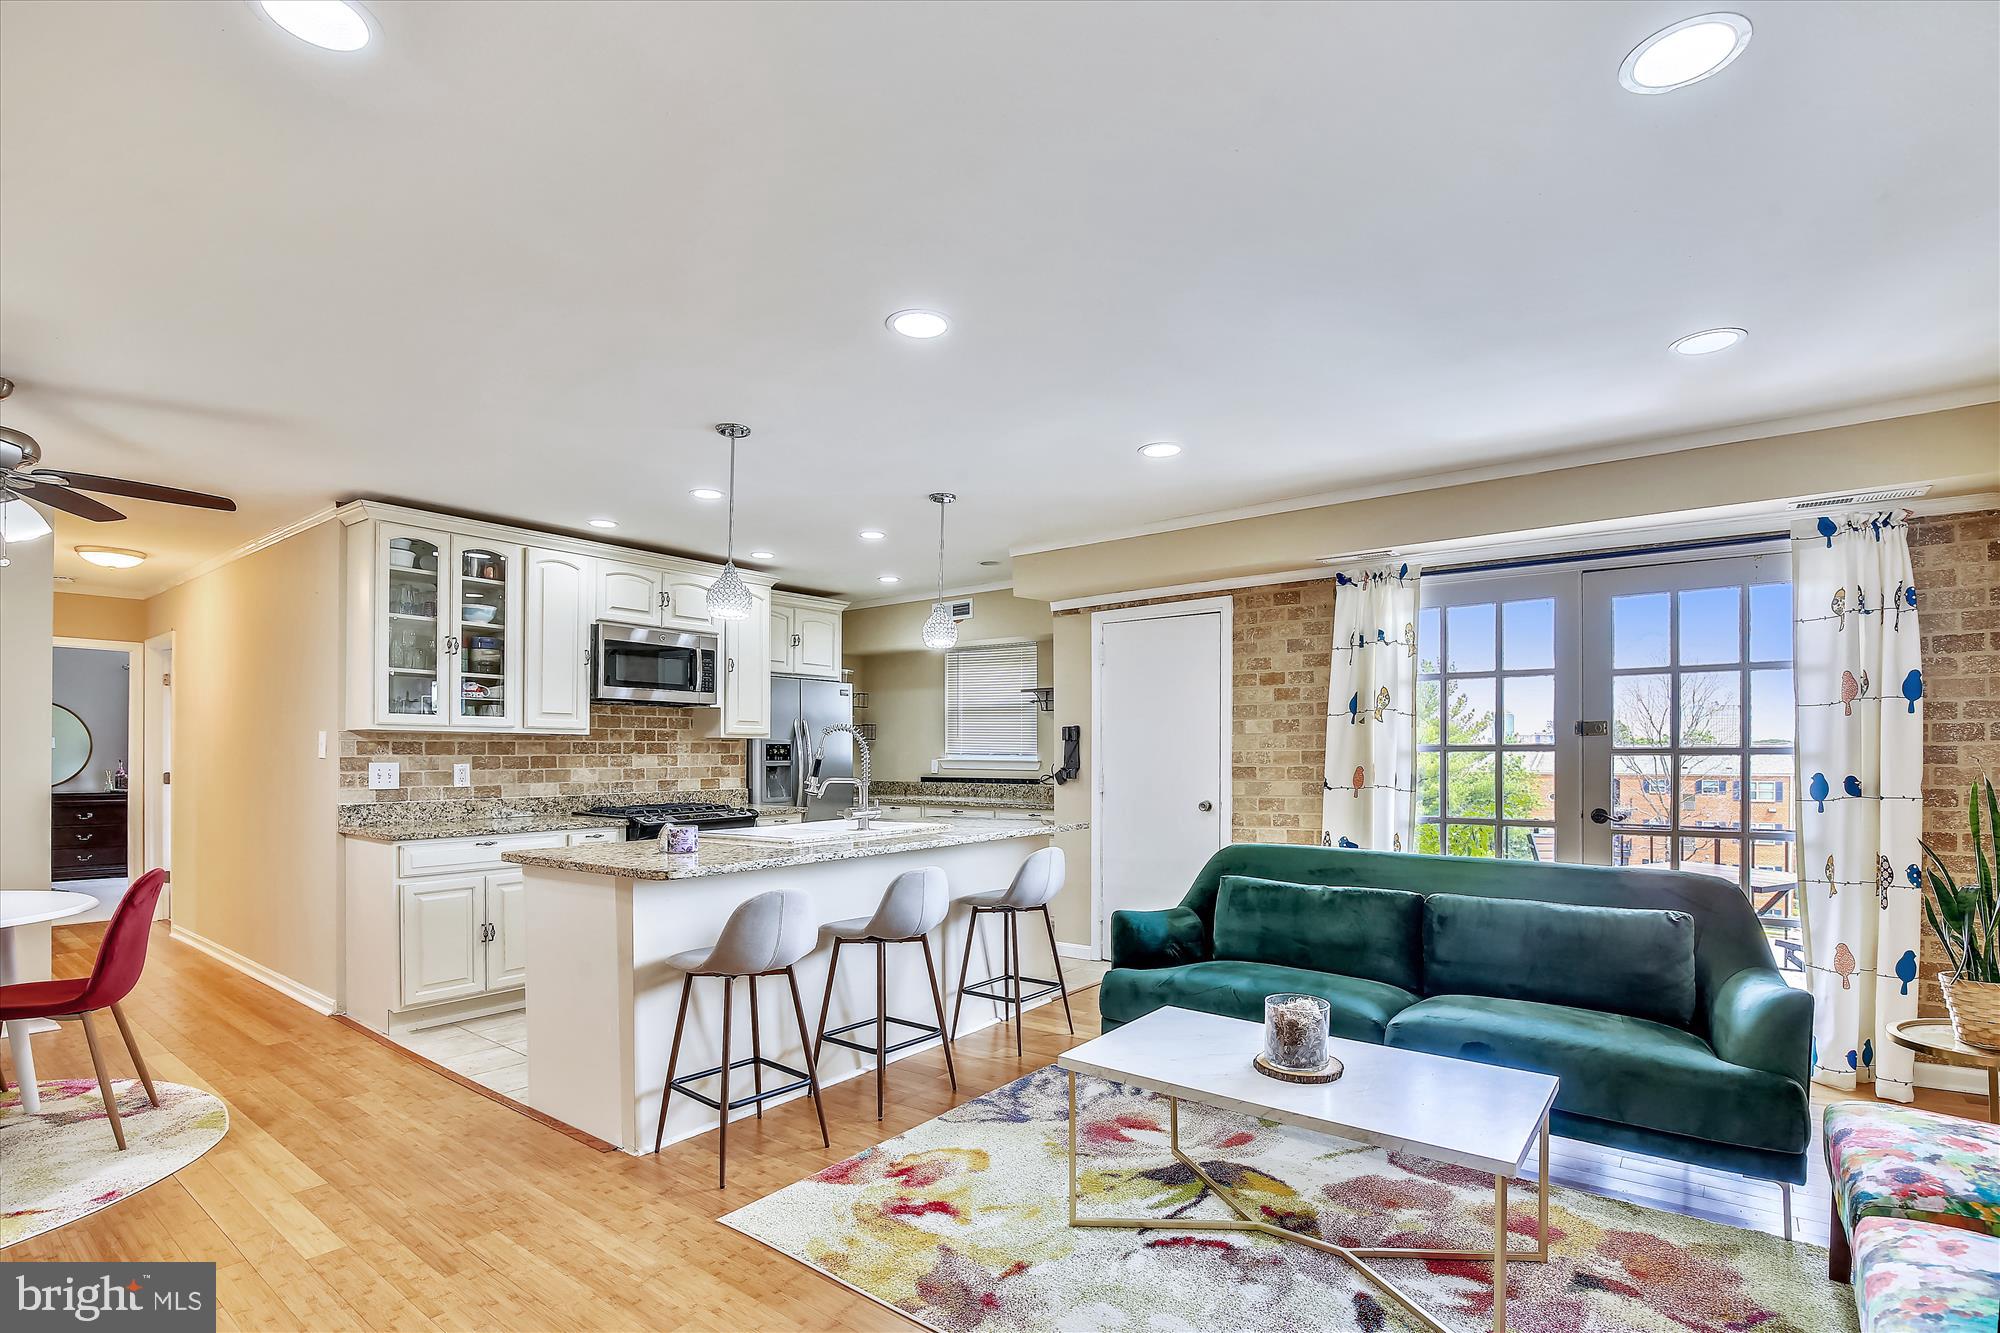 a living room with stainless steel appliances kitchen island granite countertop furniture a rug kitchen view and a window